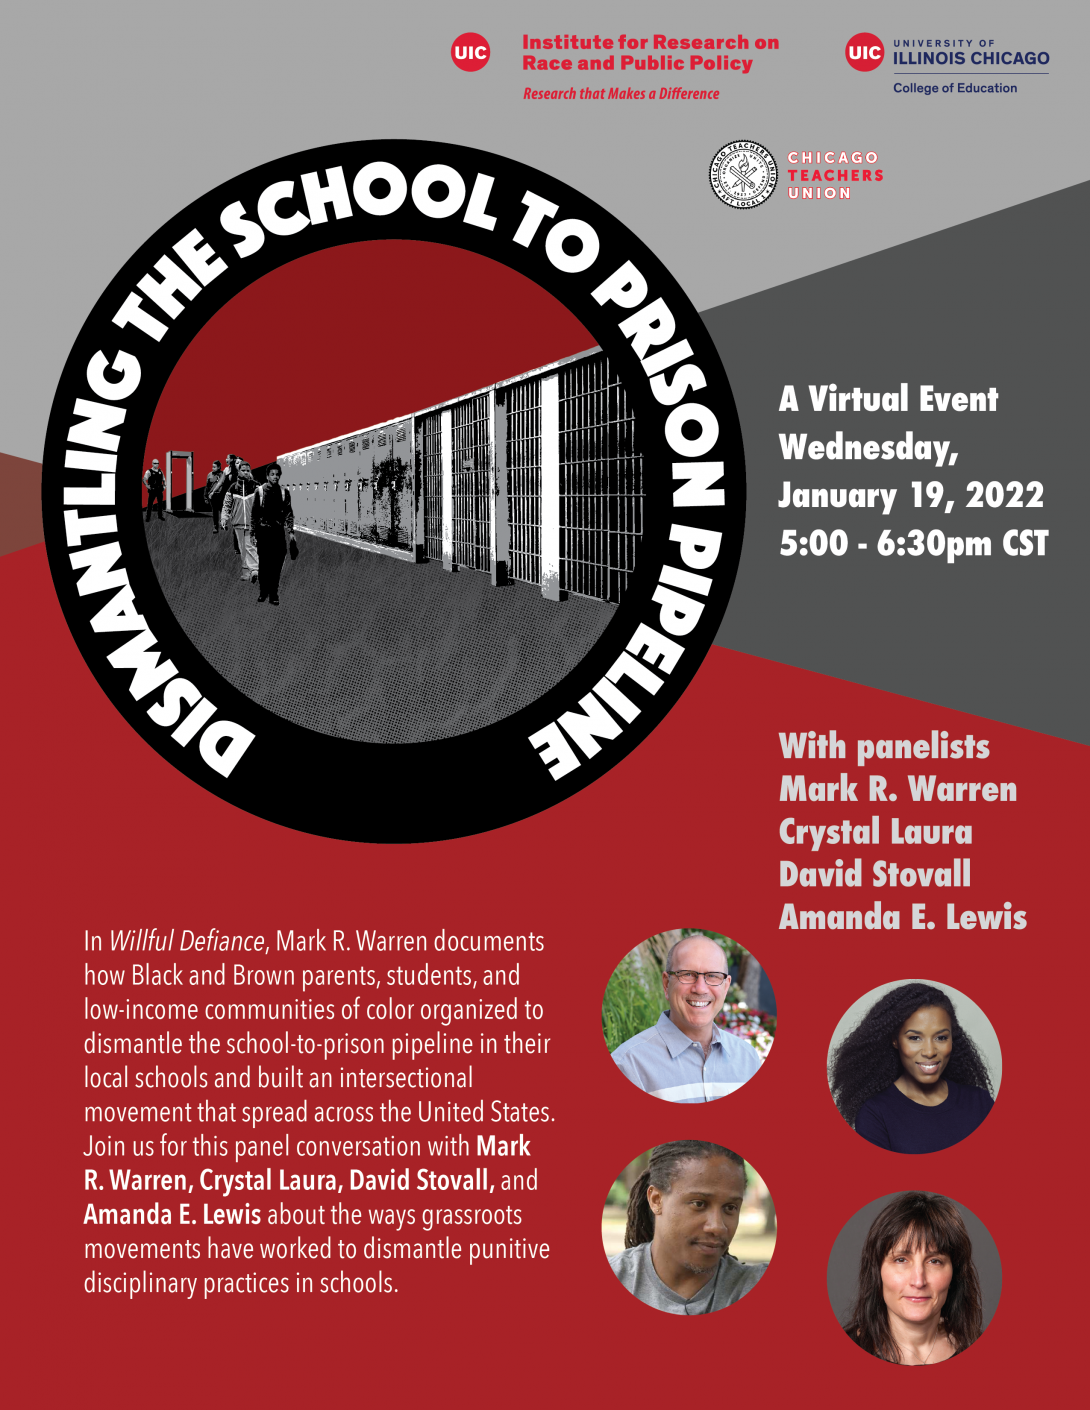 Circular image of students walking down a school hallway that becomes a row of prison cells with event info around the circle